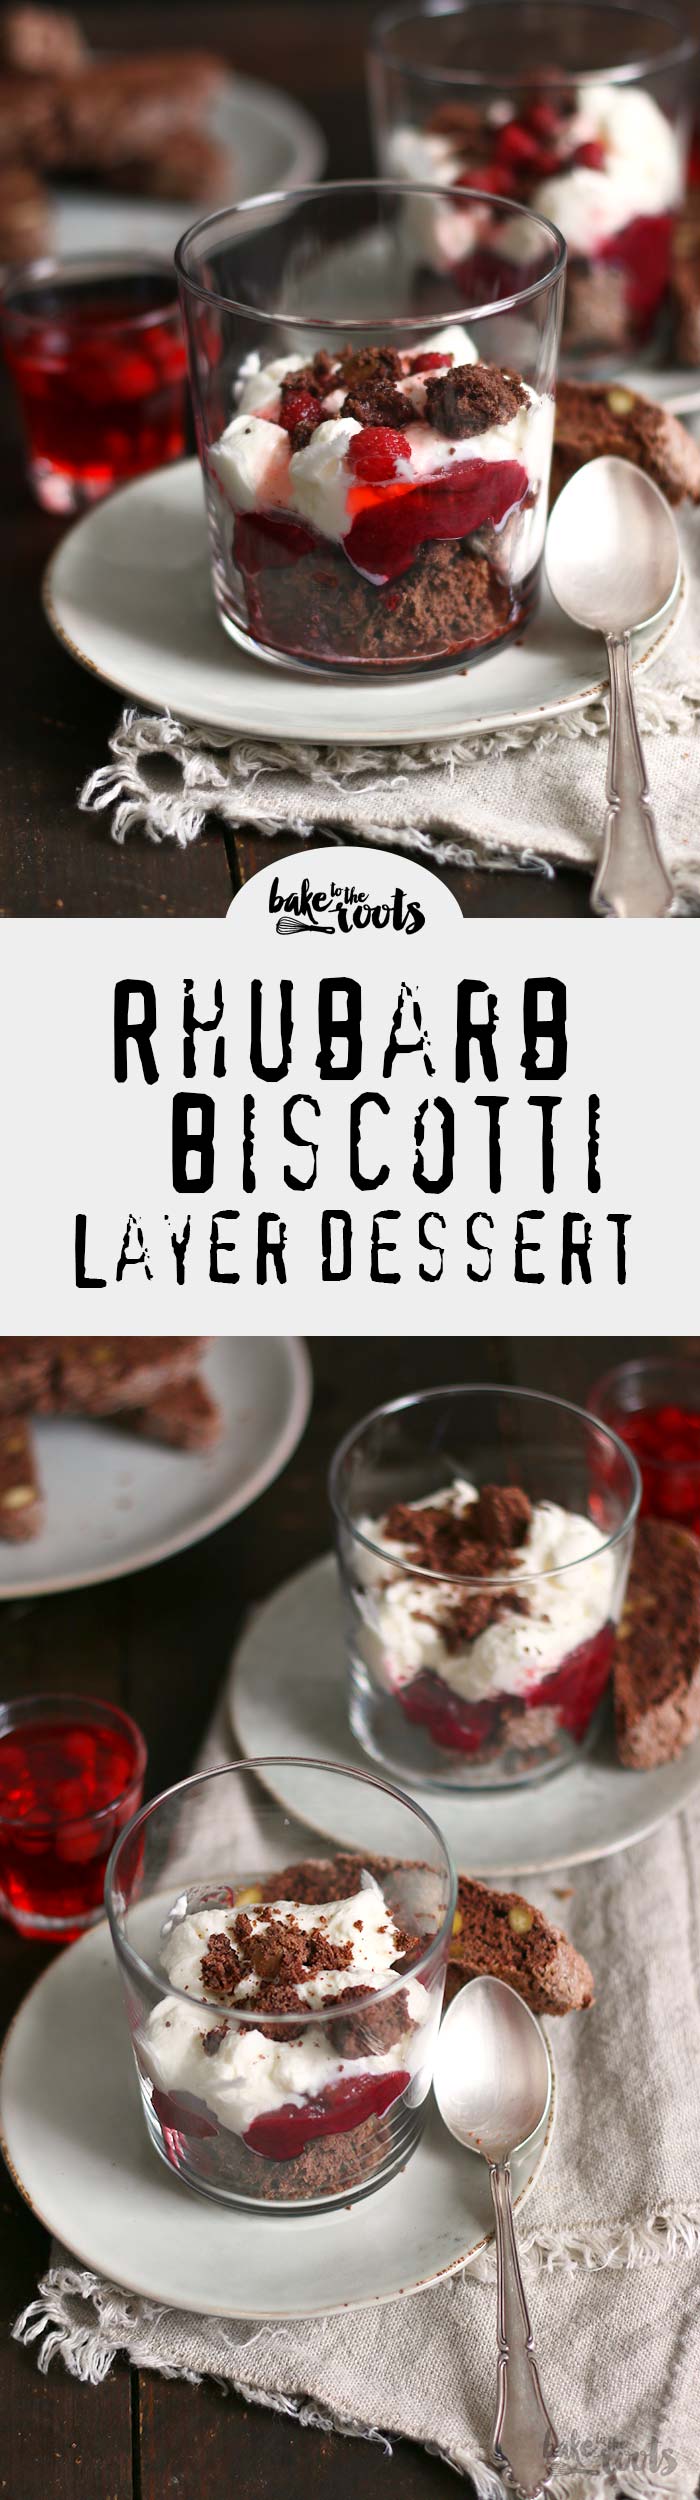 Delicious and easy to prepare dessert - Rhubarb Biscotti Layer Dessert | Bake to the roots